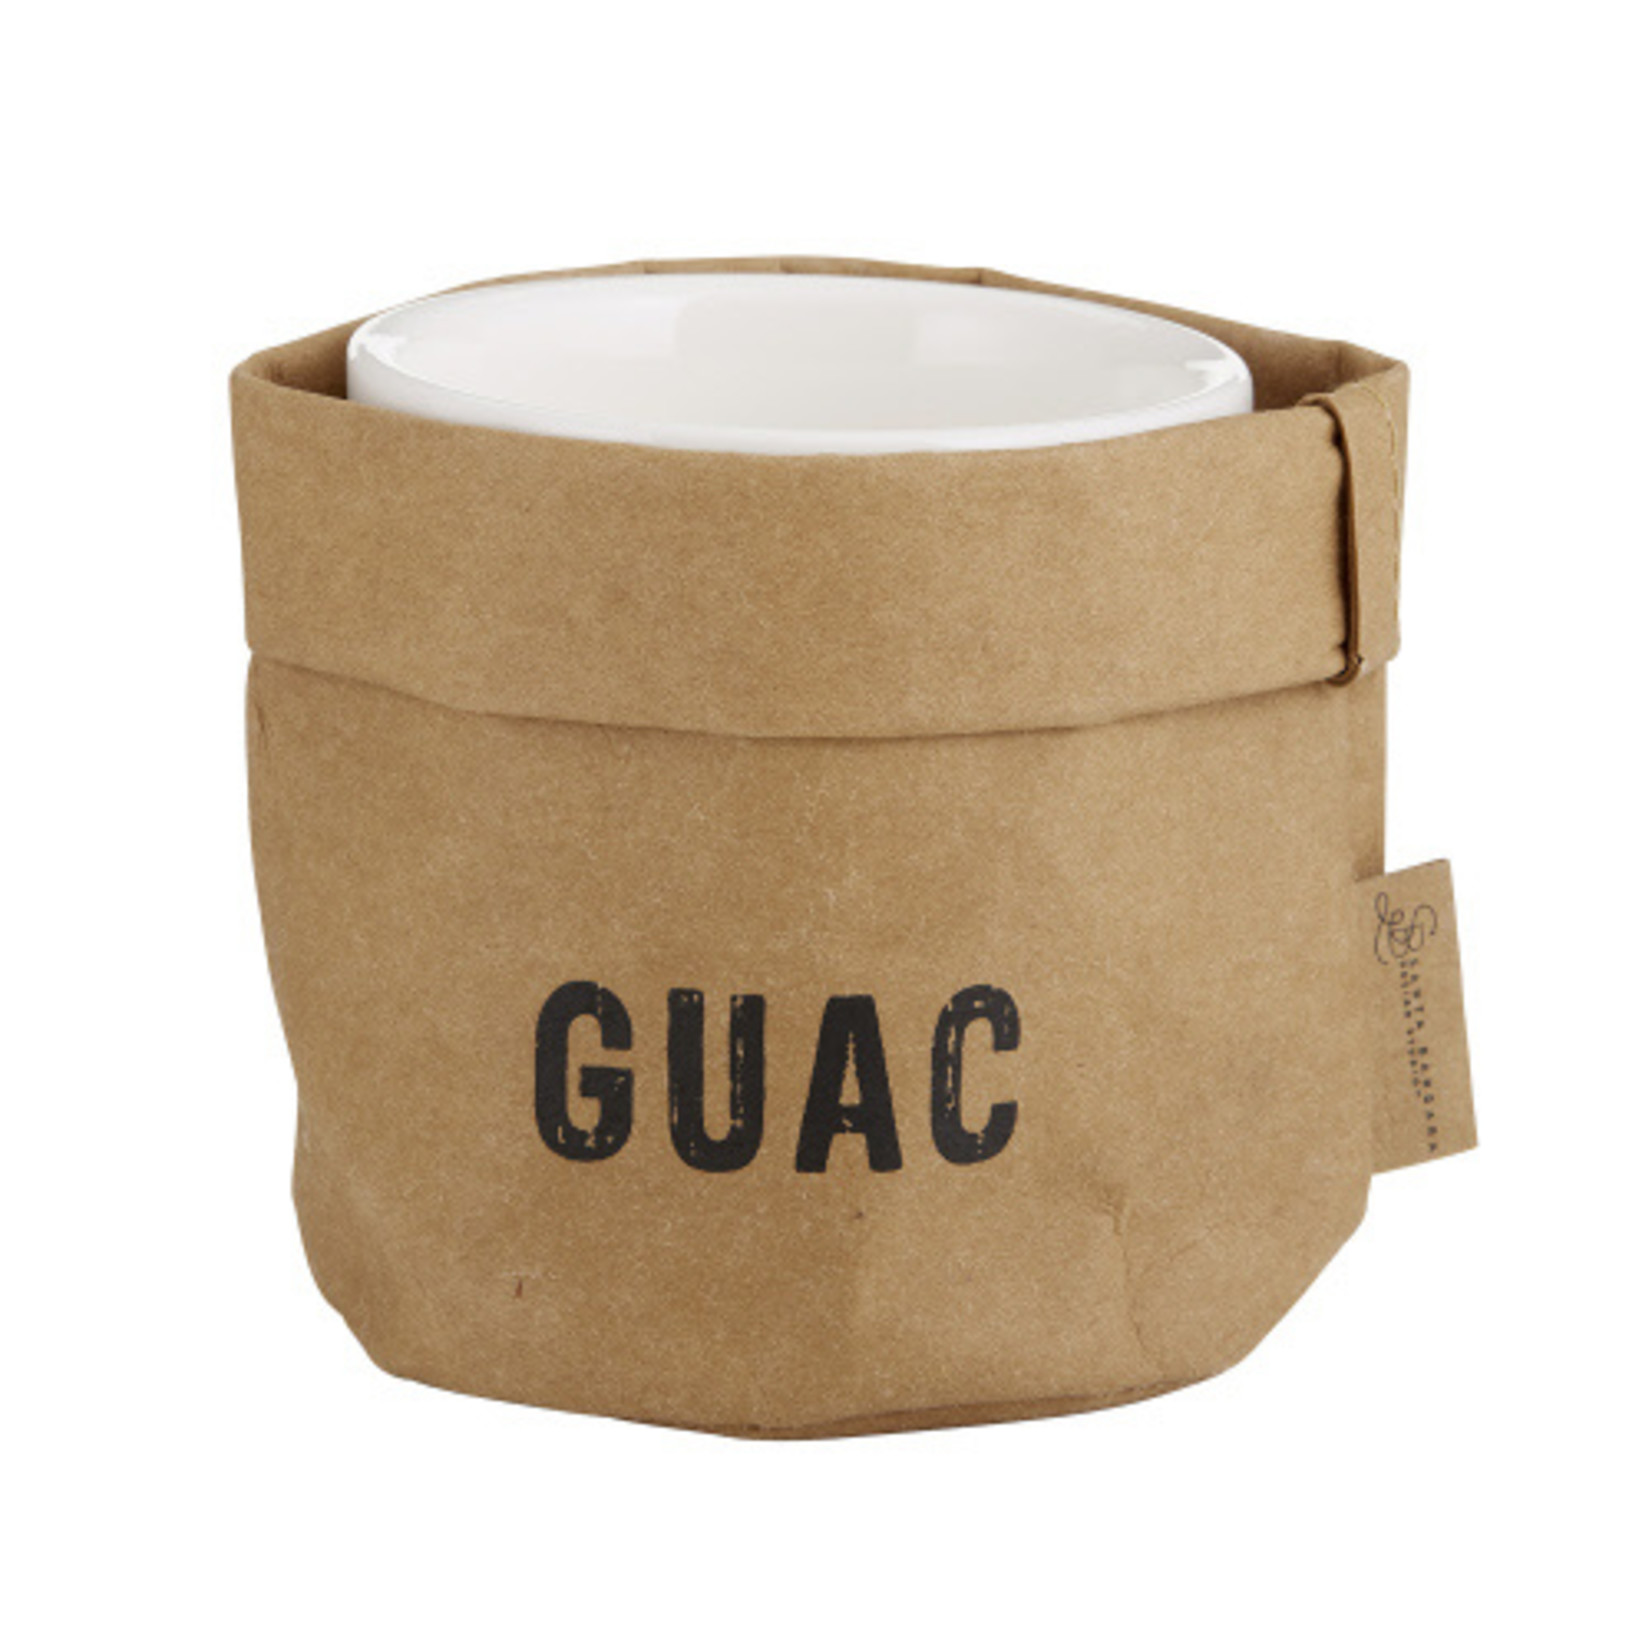 Creative Brands Washable Paper Guacamole Holder with Ceramic Dish